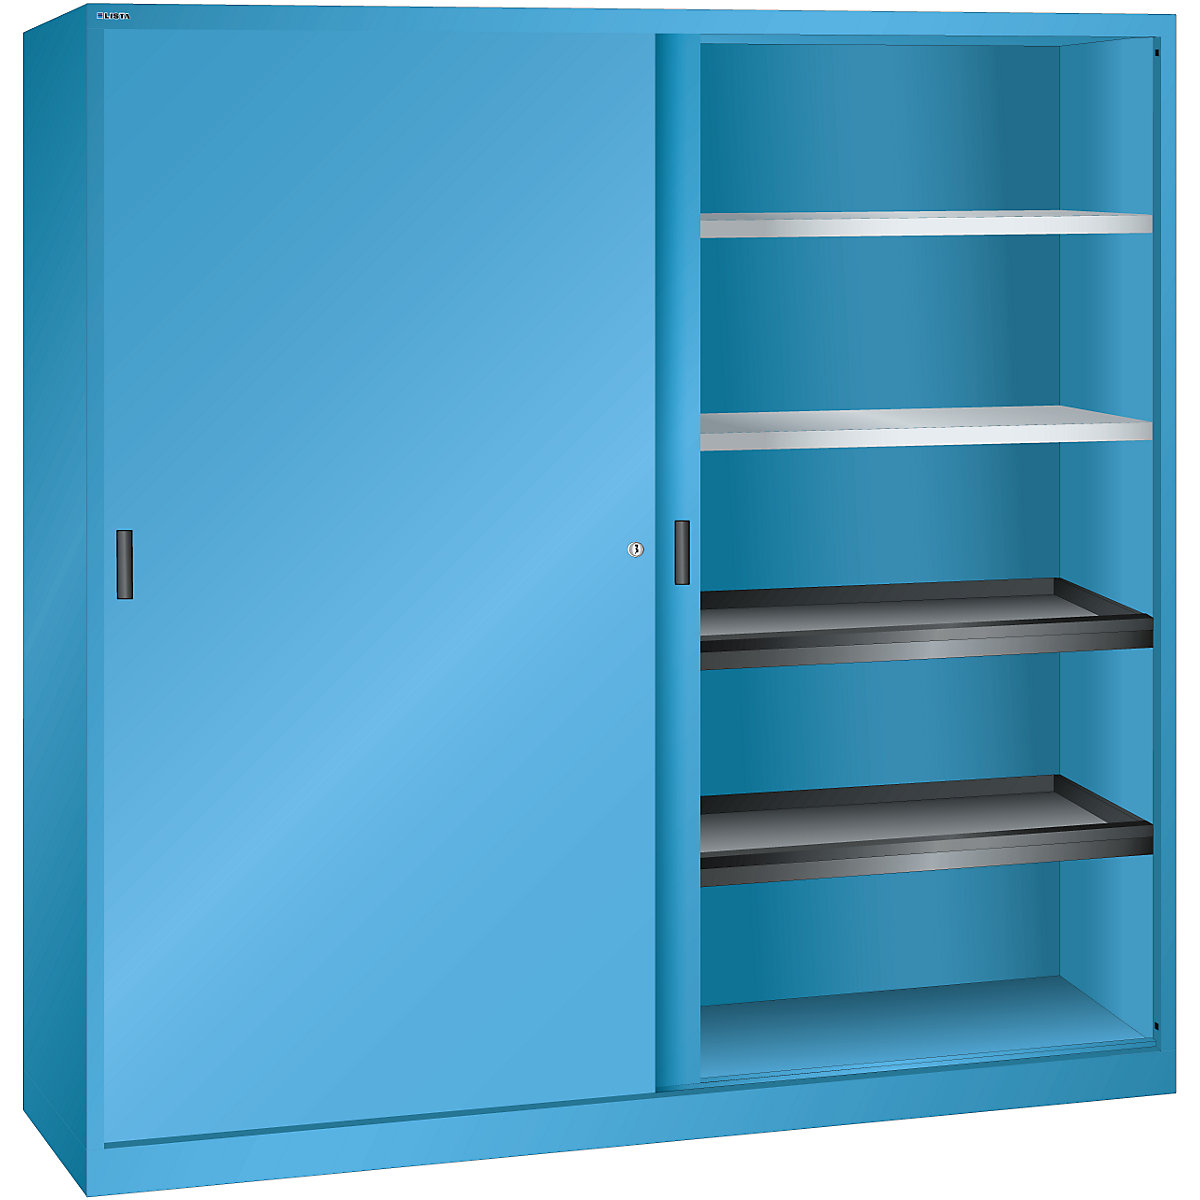 Sliding door cupboard with solid panel doors – LISTA, 4 shelves, 4 pull-out shelves, light blue-8